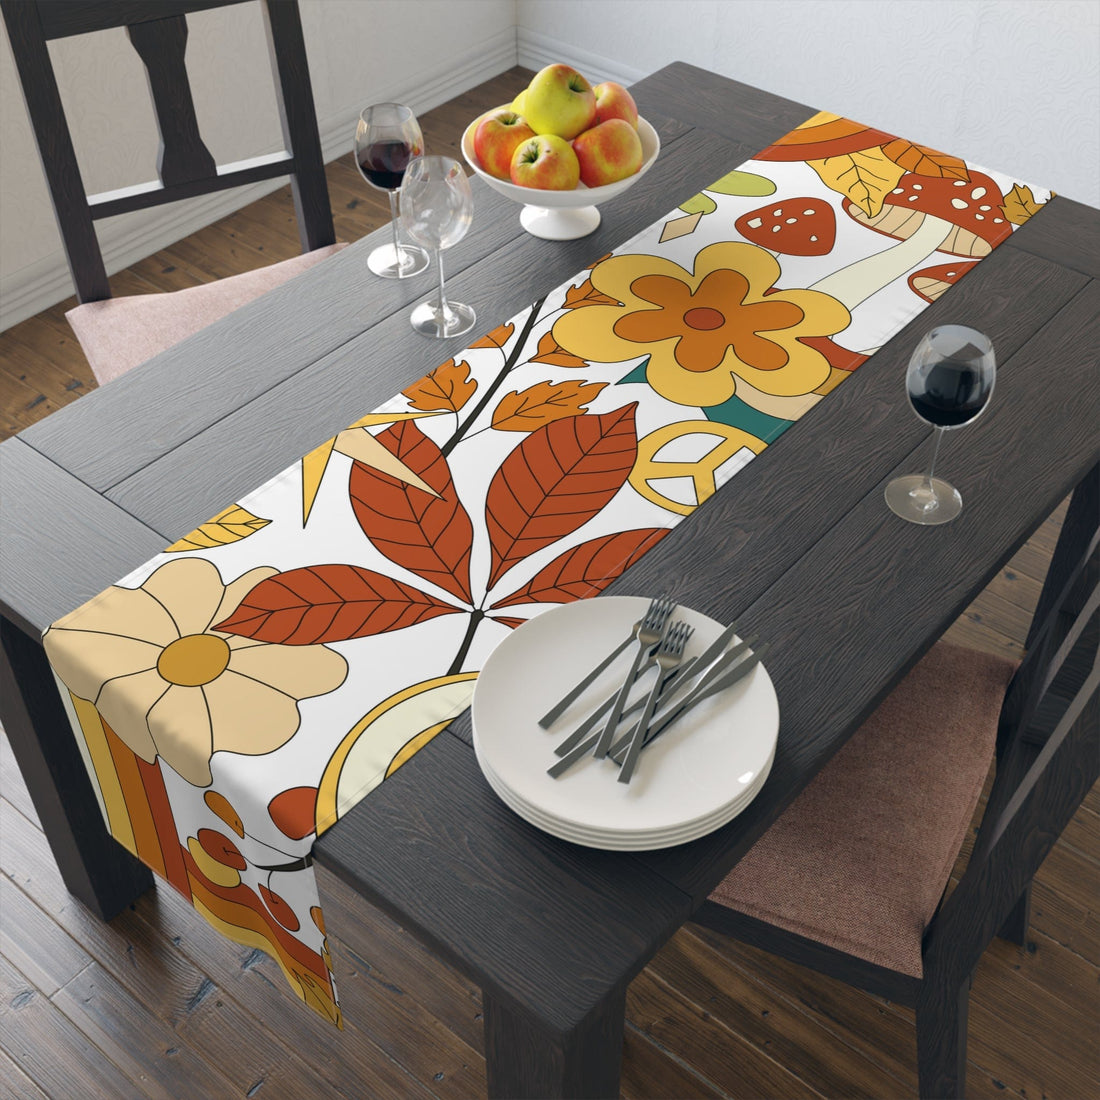 Kate McEnroe New York 70s Mid Mod Groovy Hippie Floral Cotton Twill Table Runners Table Runners 16x72 inch / Cotton Twill TableRunner-CottonTwill-16x72-20220809190611664